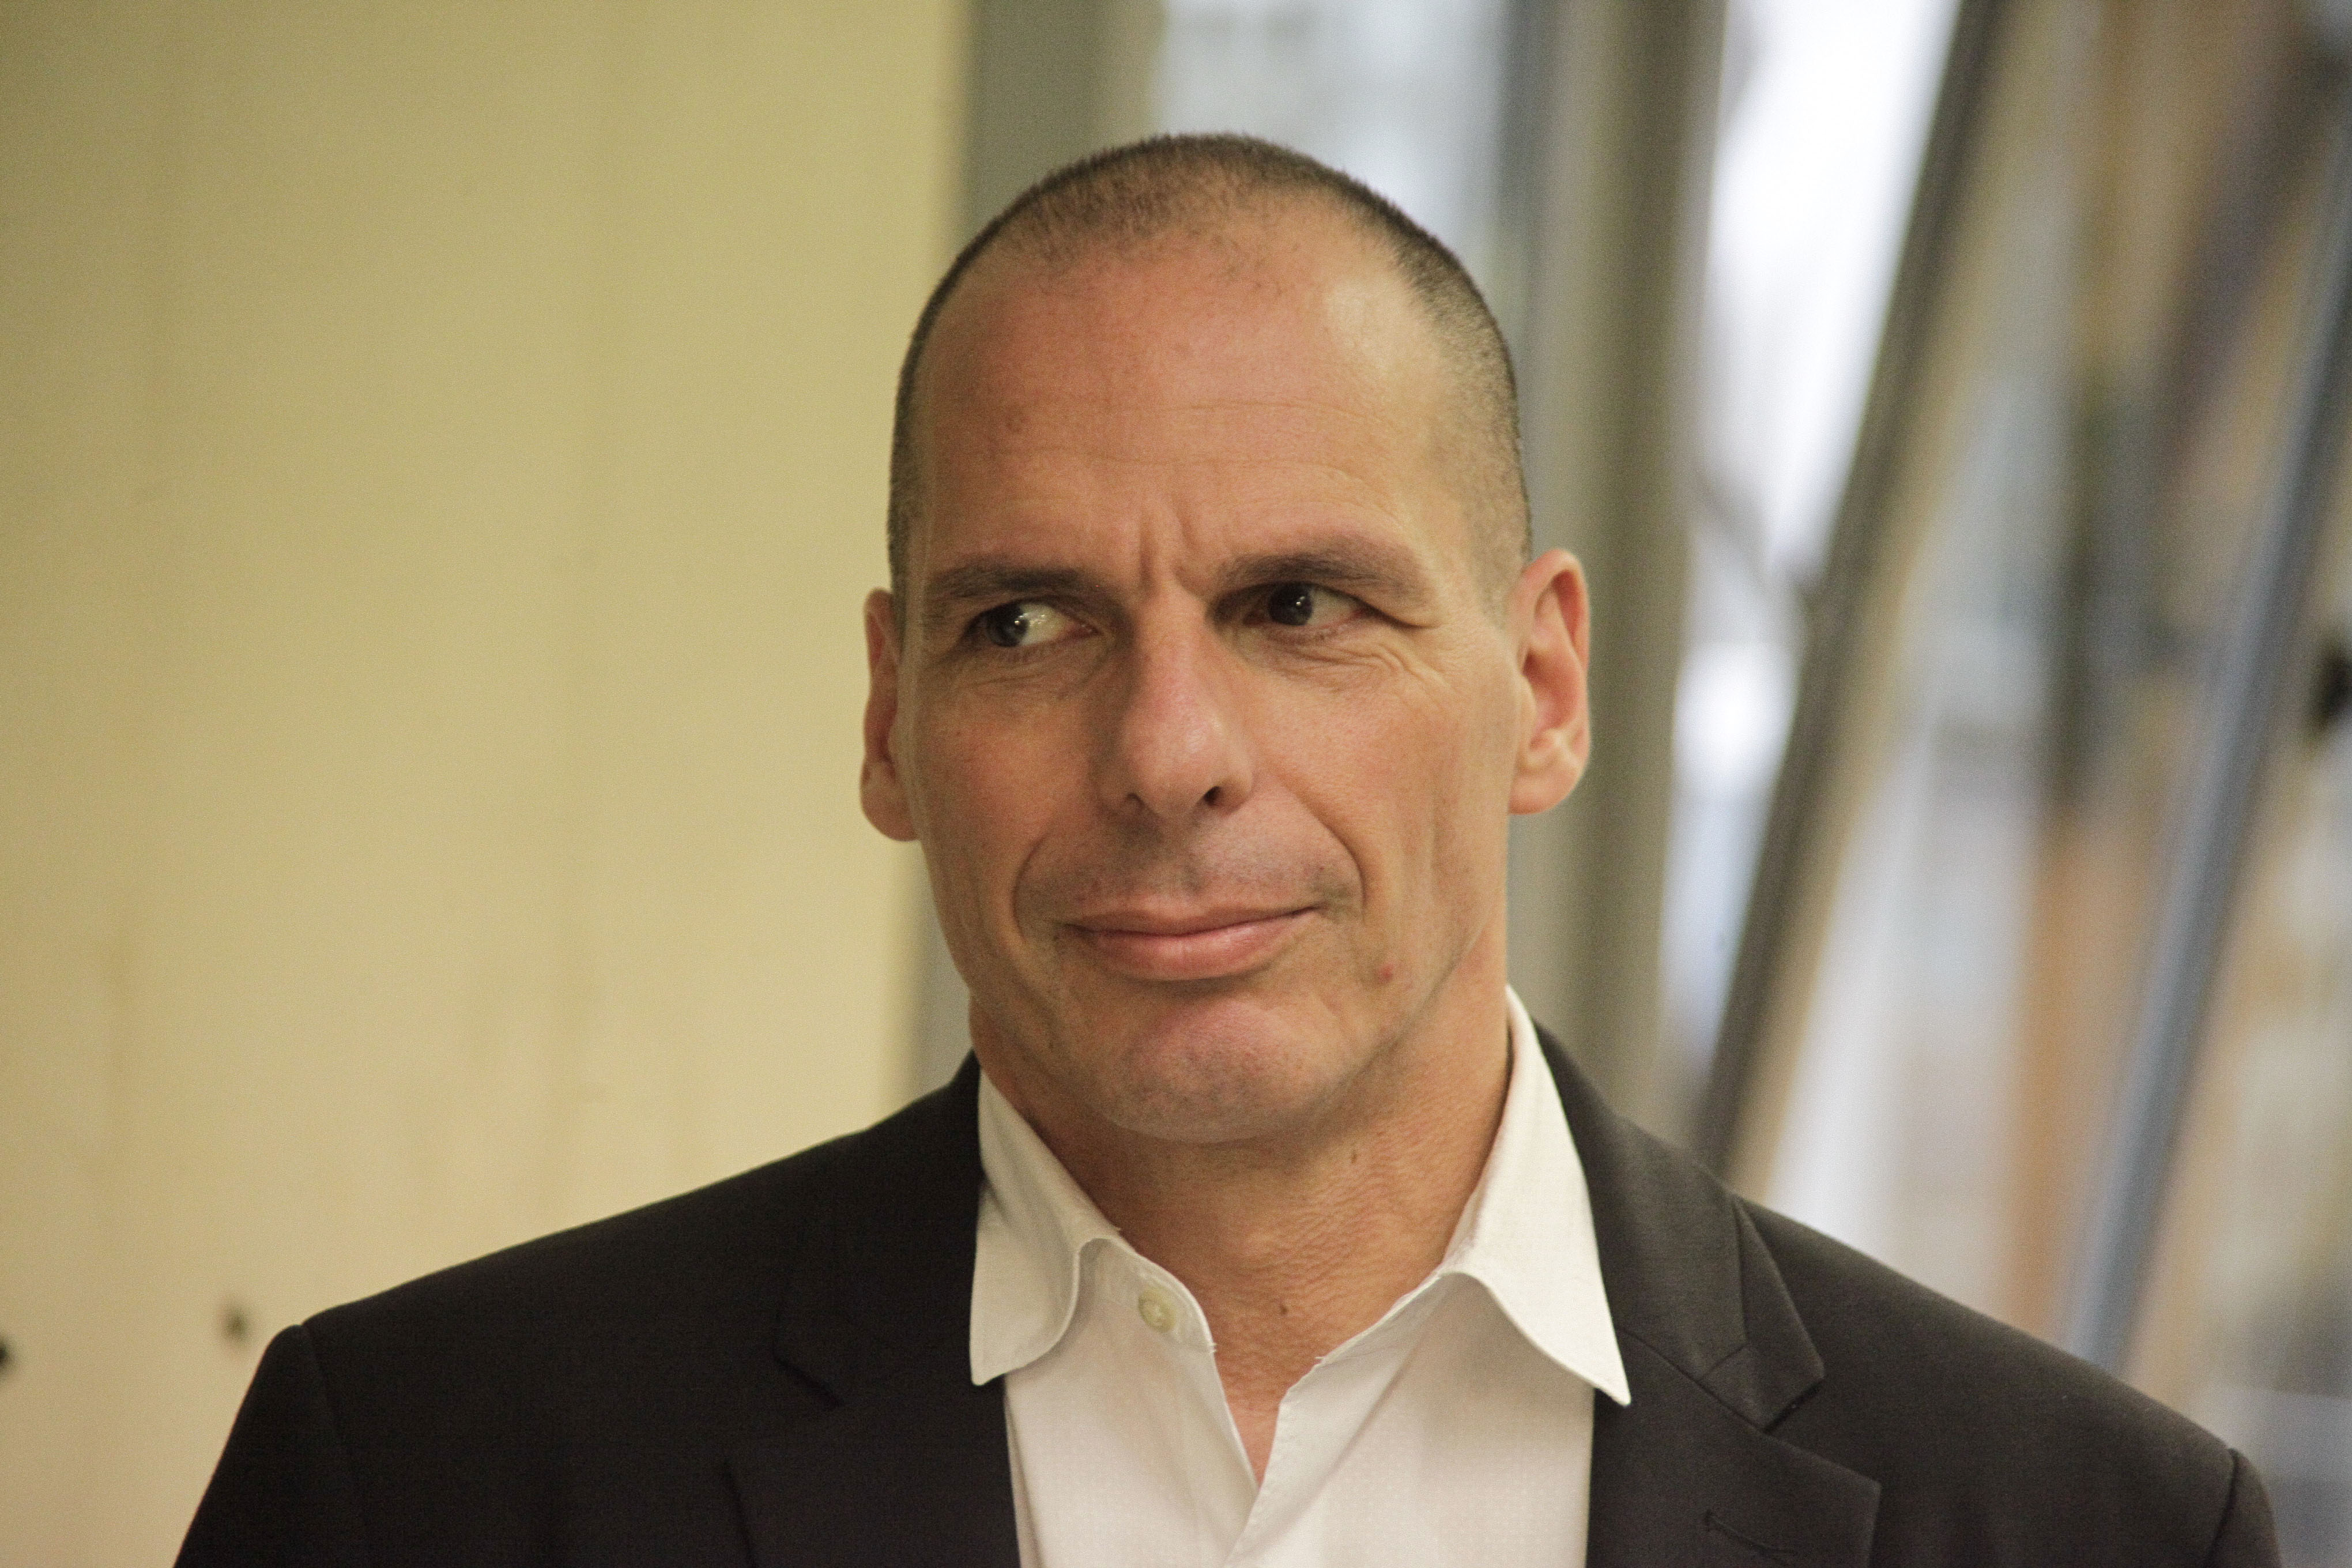 Varoufakis favors a single agreement “once and for all”